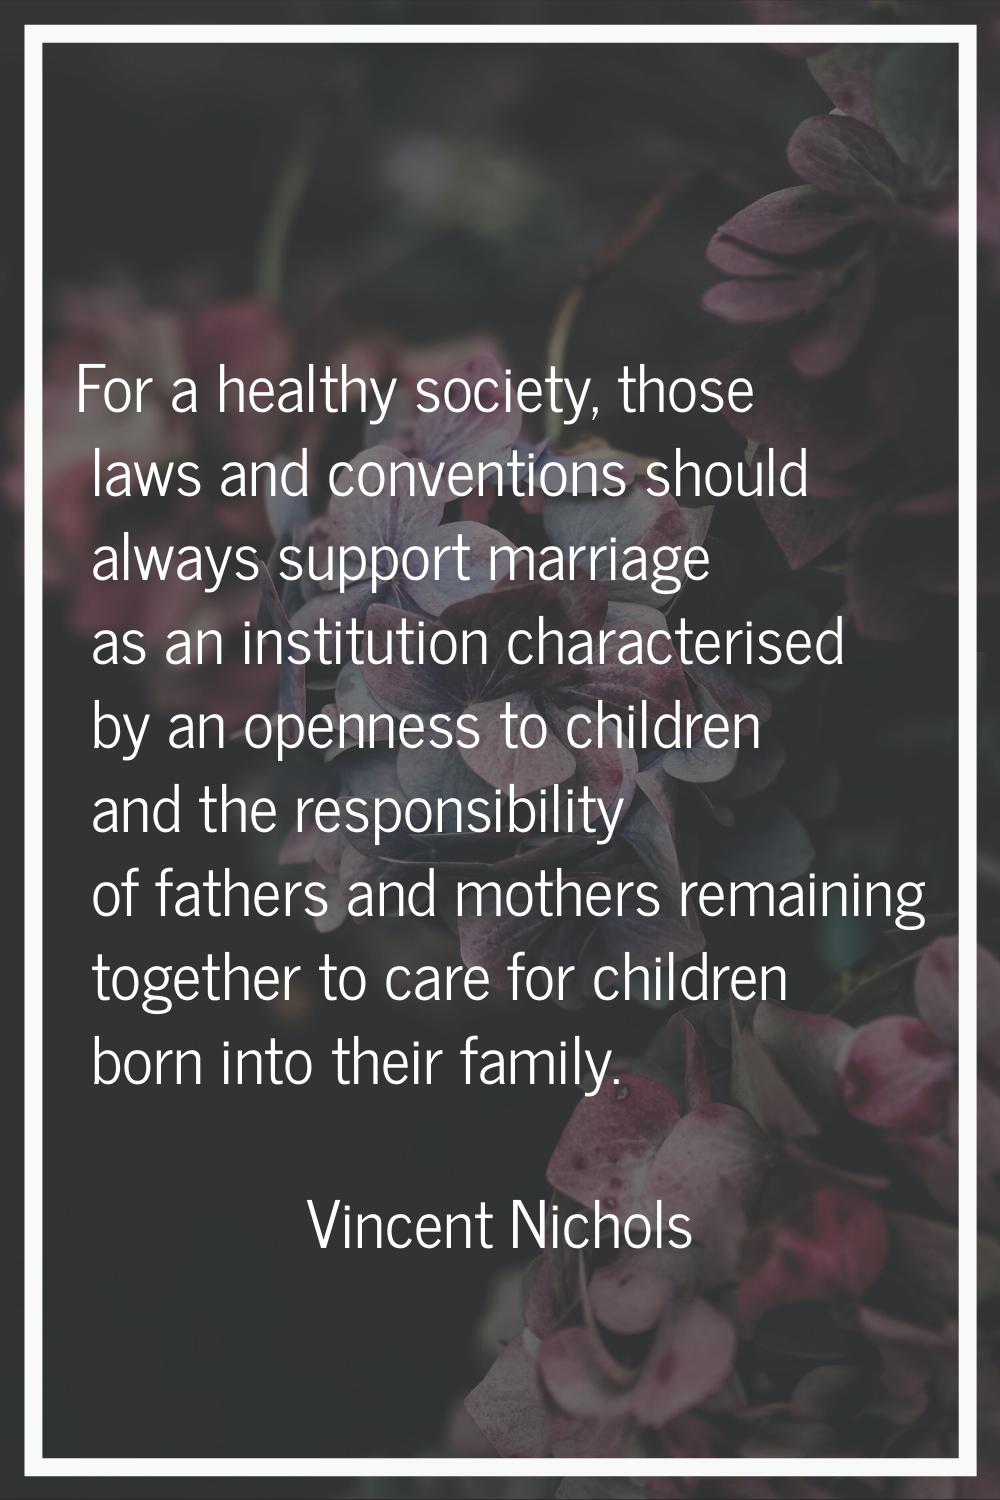 For a healthy society, those laws and conventions should always support marriage as an institution 